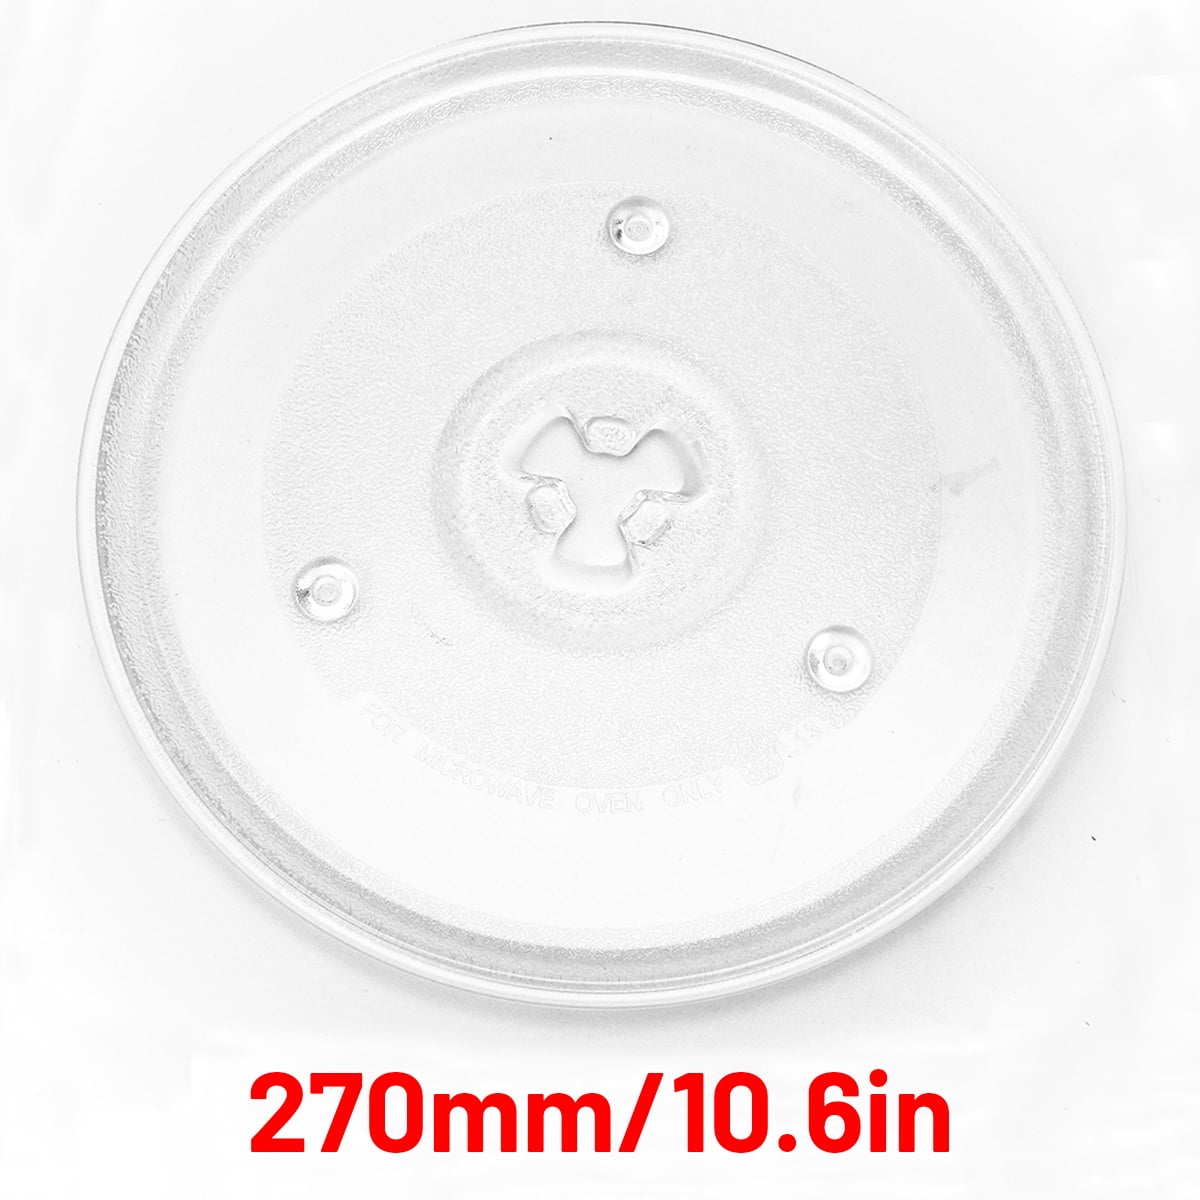 For TESCO UNIVERSAL MICROWAVE TURNTABLE Glass PLATE 270MM 